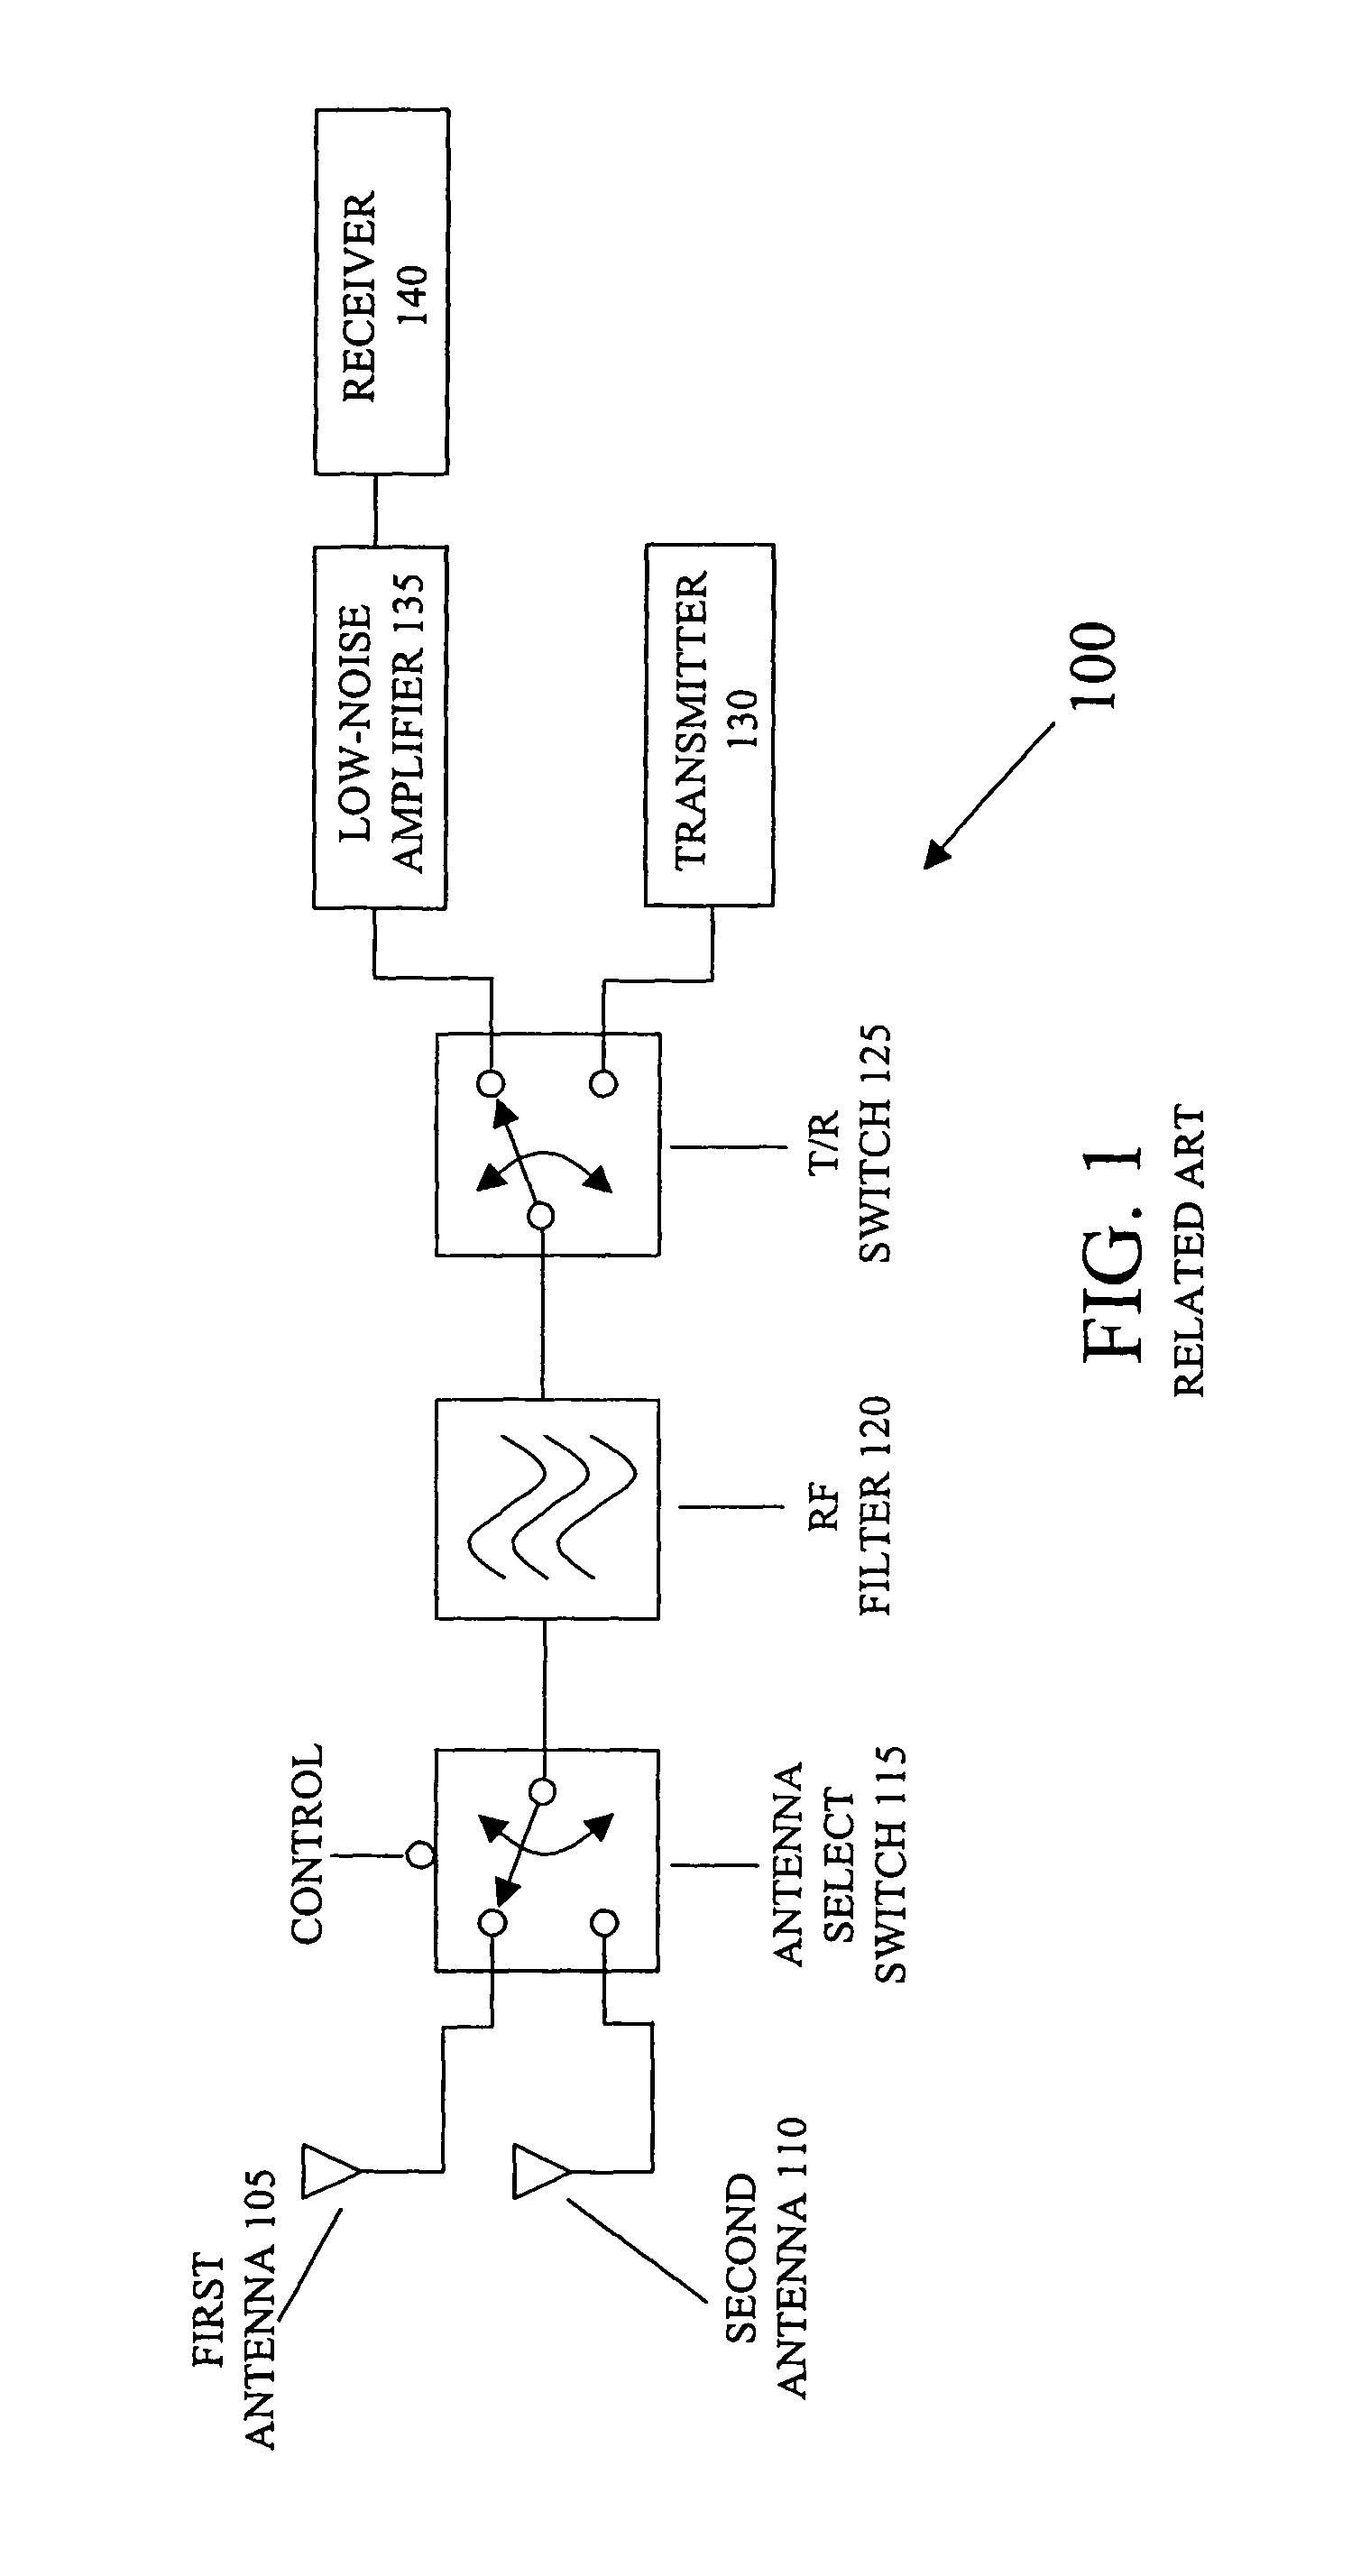 Transceiver system including dual low-noise amplifiers